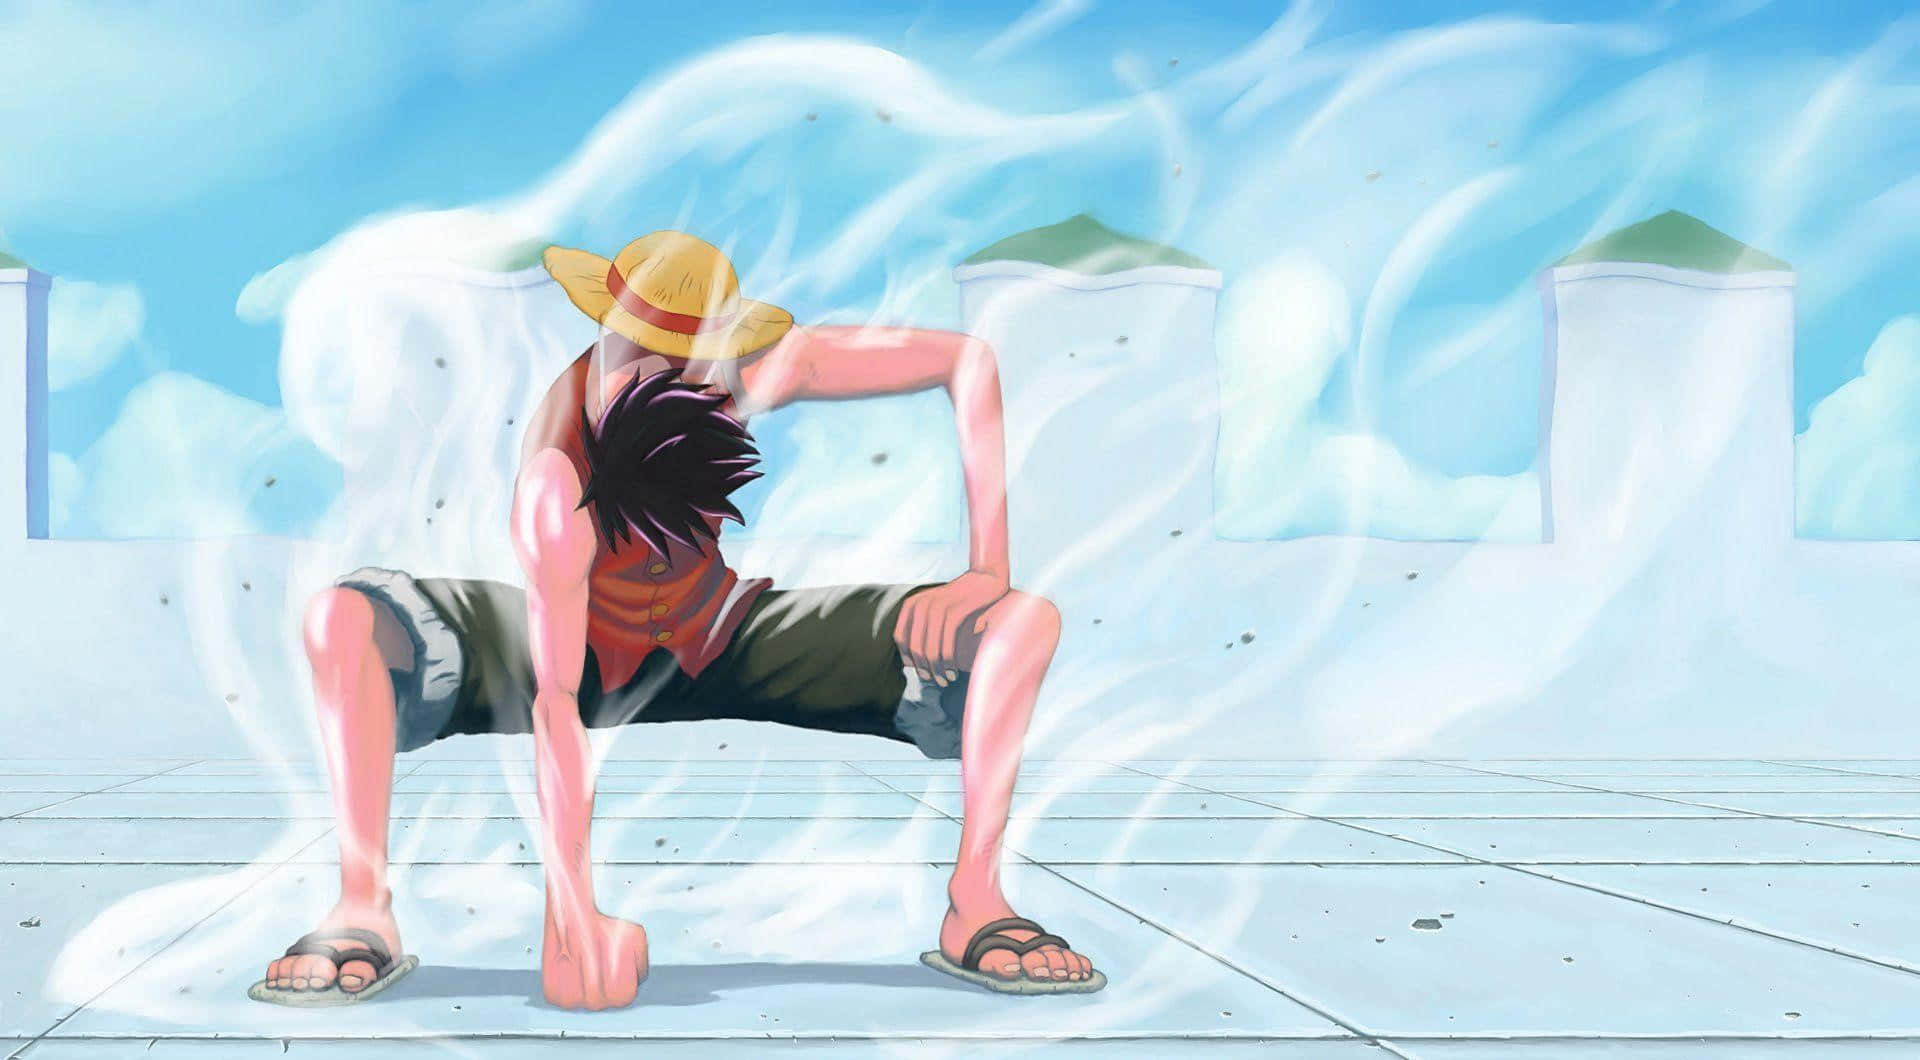 Take A Trip To A World Of Adventure With The Infamous Cool Luffy!